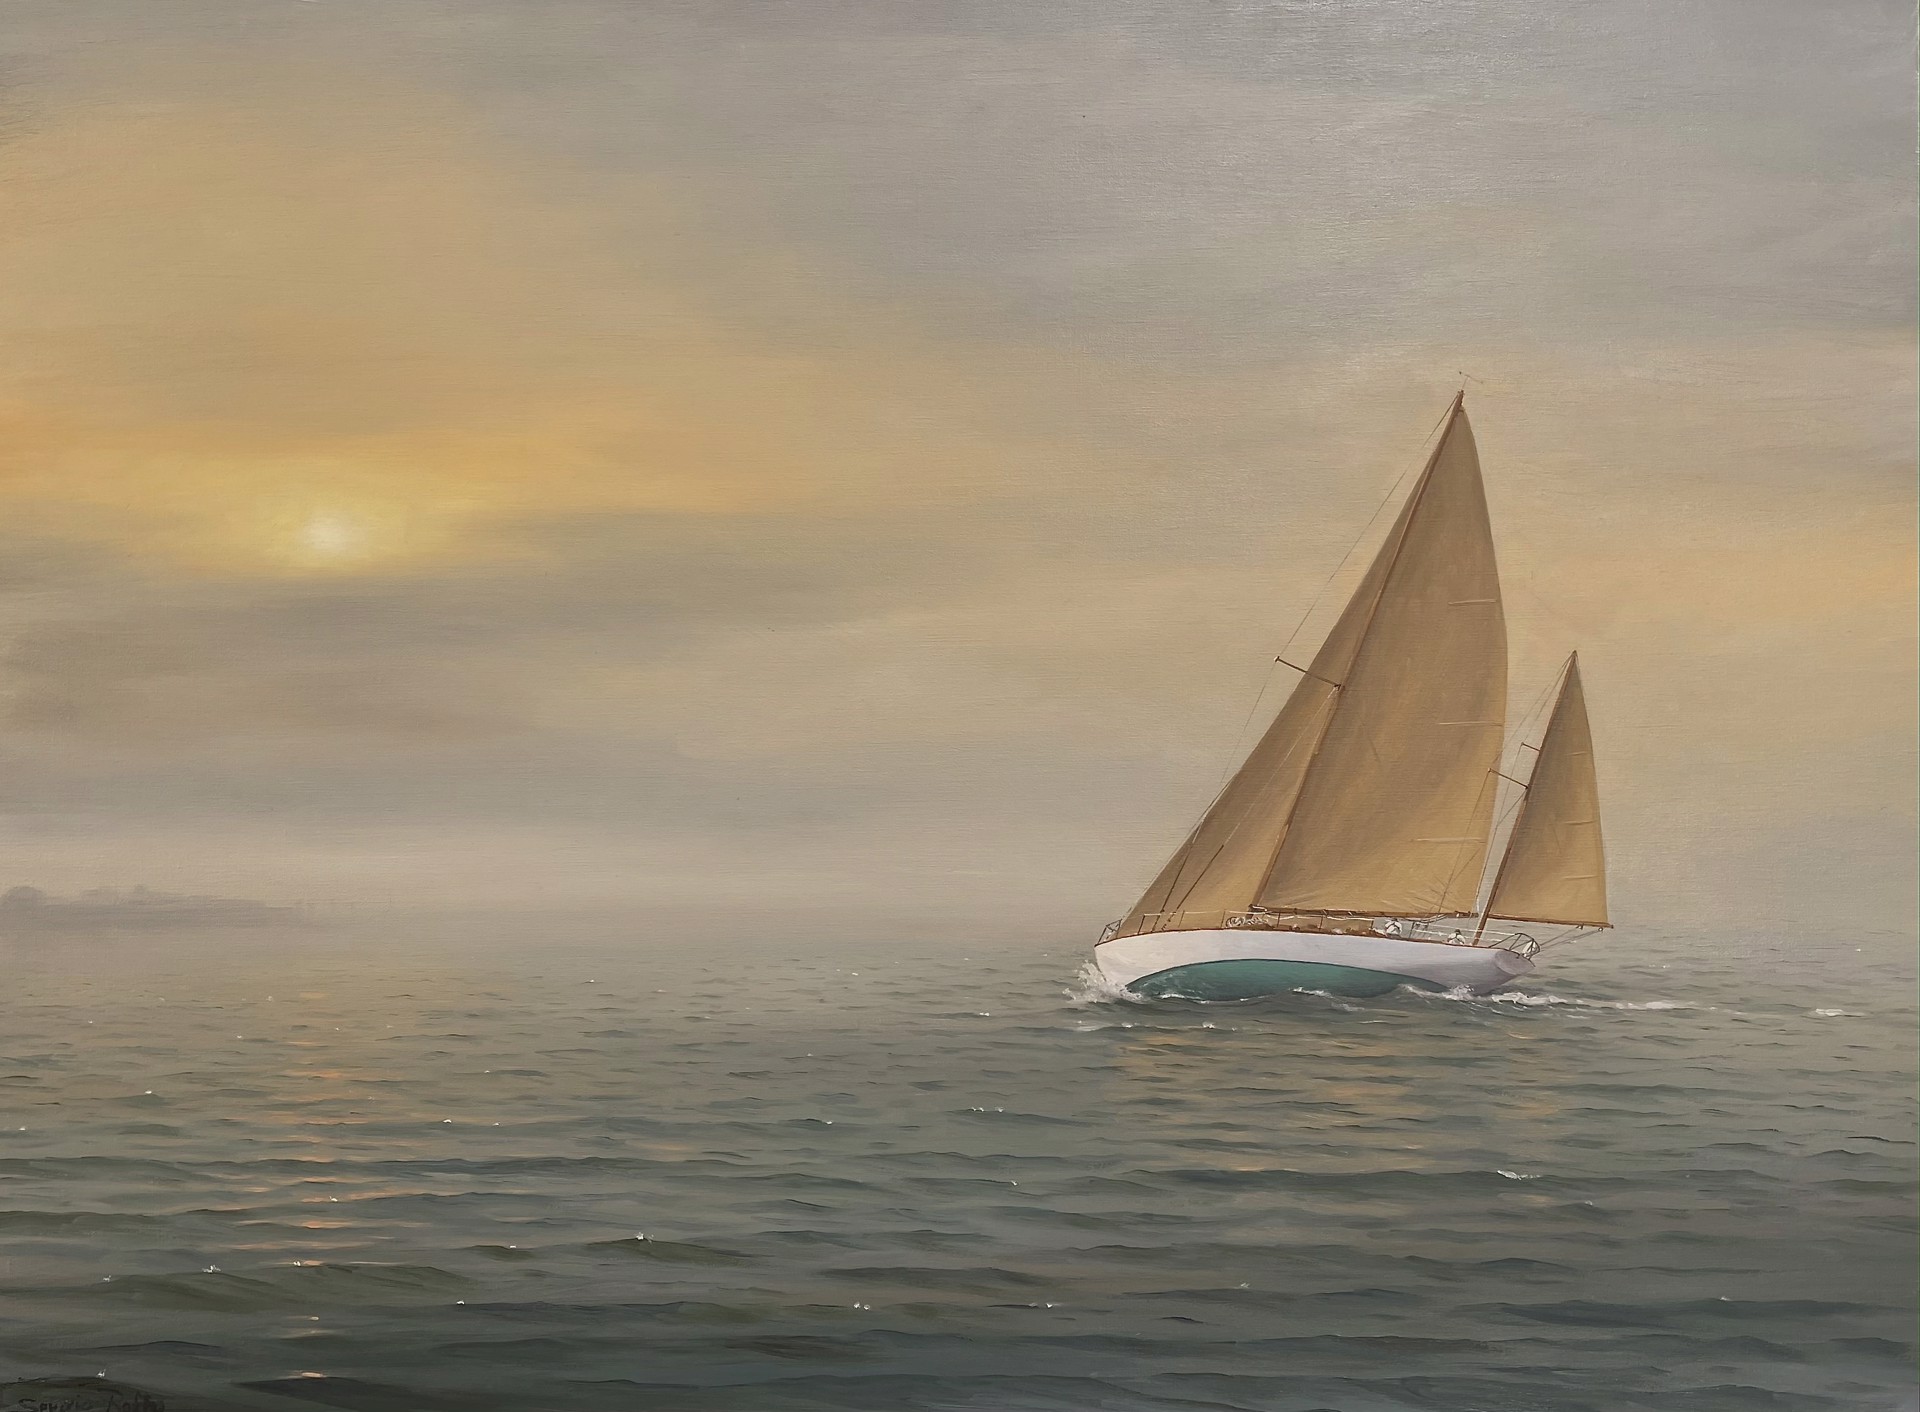 Through the Mist, Concordia Built Yawl by Sergio Roffo